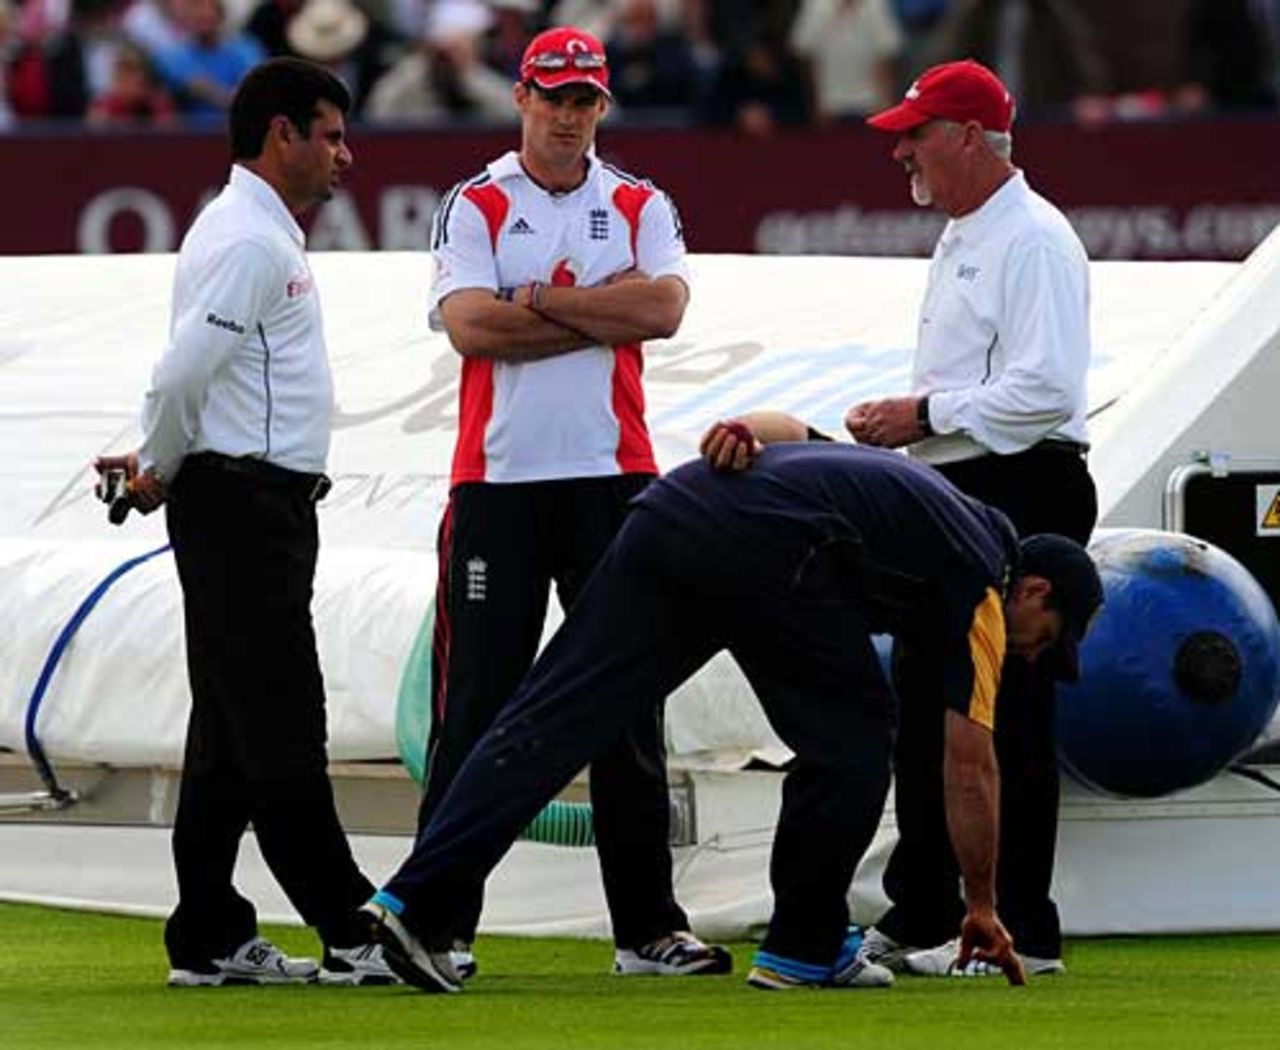 Andrew Strauss and Ricky Ponting inspect conditions with the two umpires, England v Australia, 3rd Test, Edgbaston, 1st day, July 30, 2009